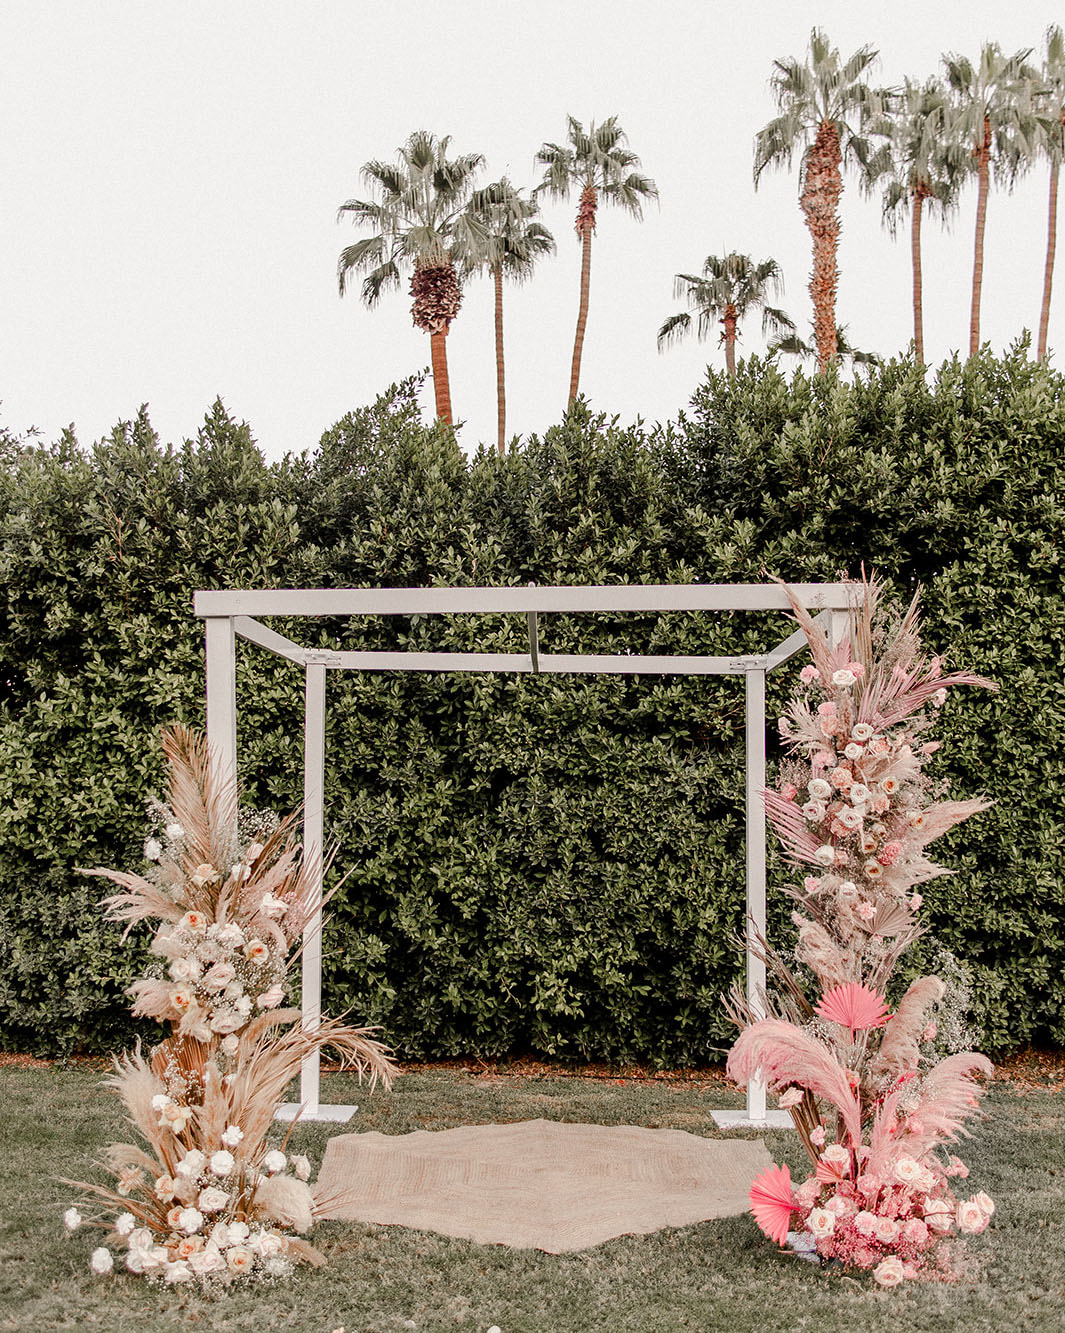 The wedding arch was done with pink fronds, pampas grass and blush blooms